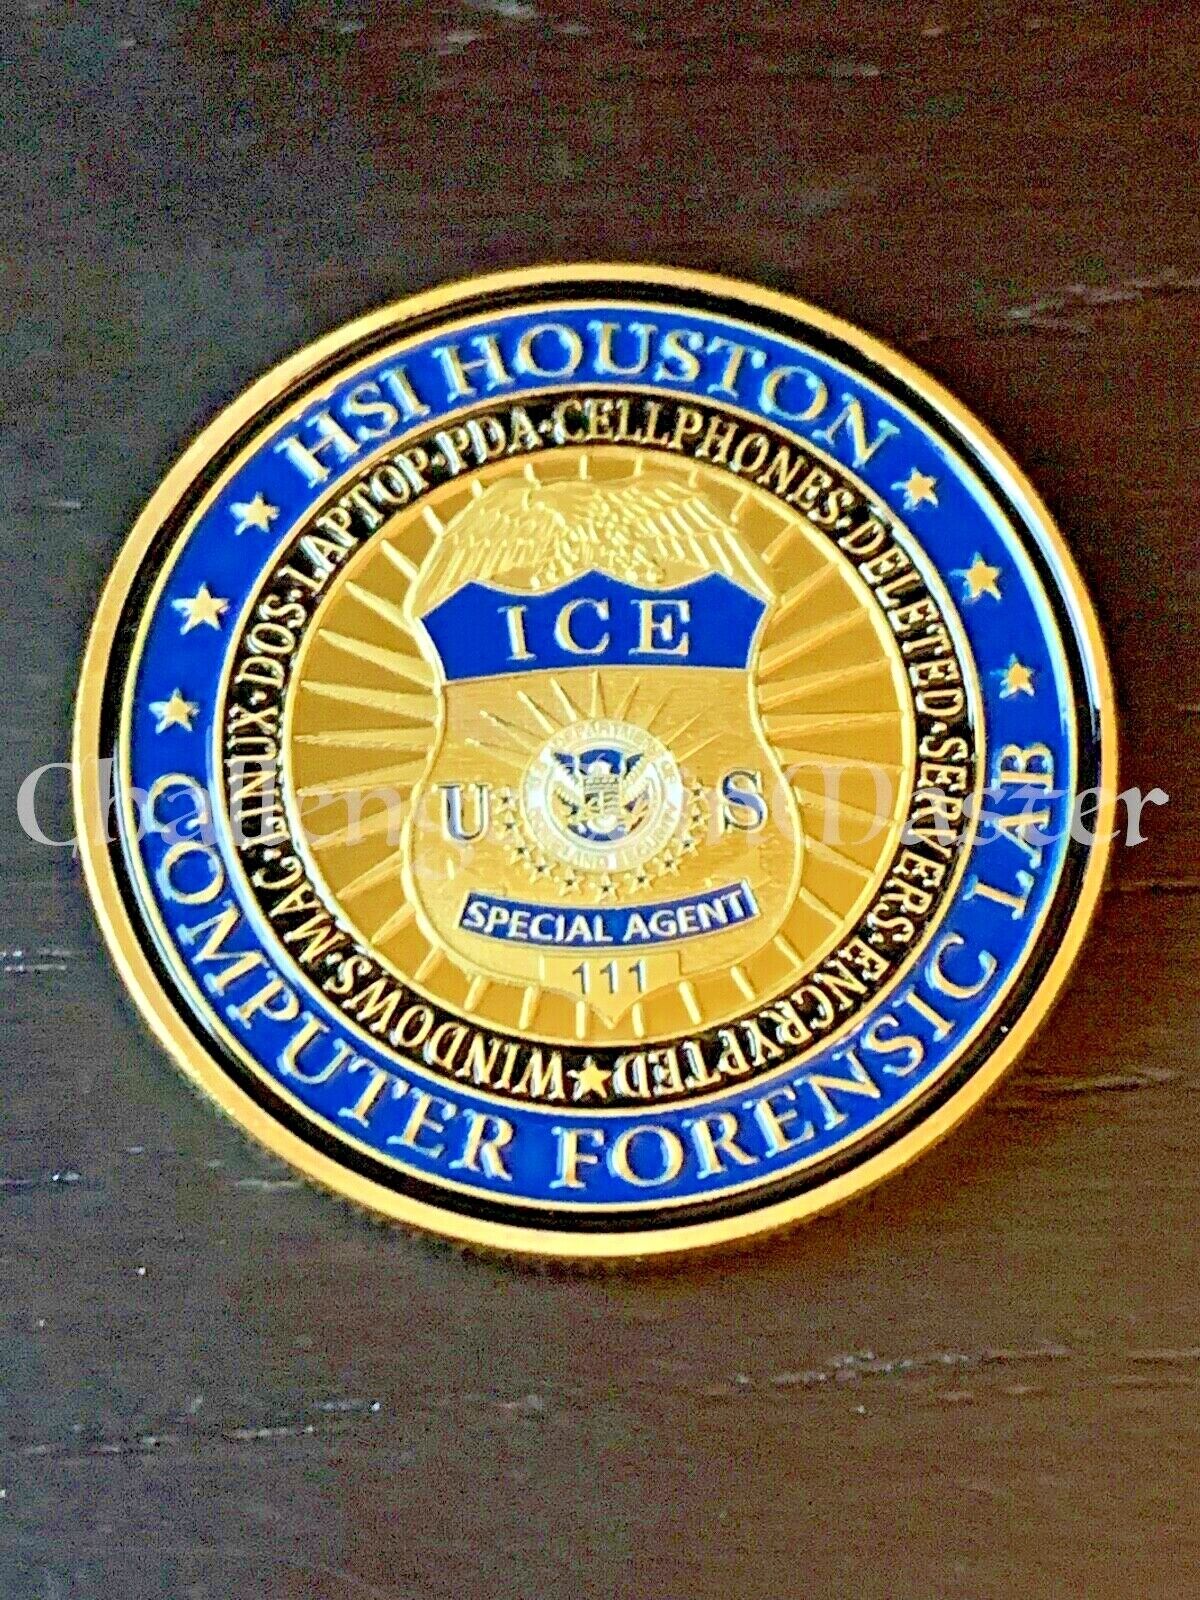 Home Land Security Investigations ICE Houston Computer Forensics Challenge Coin